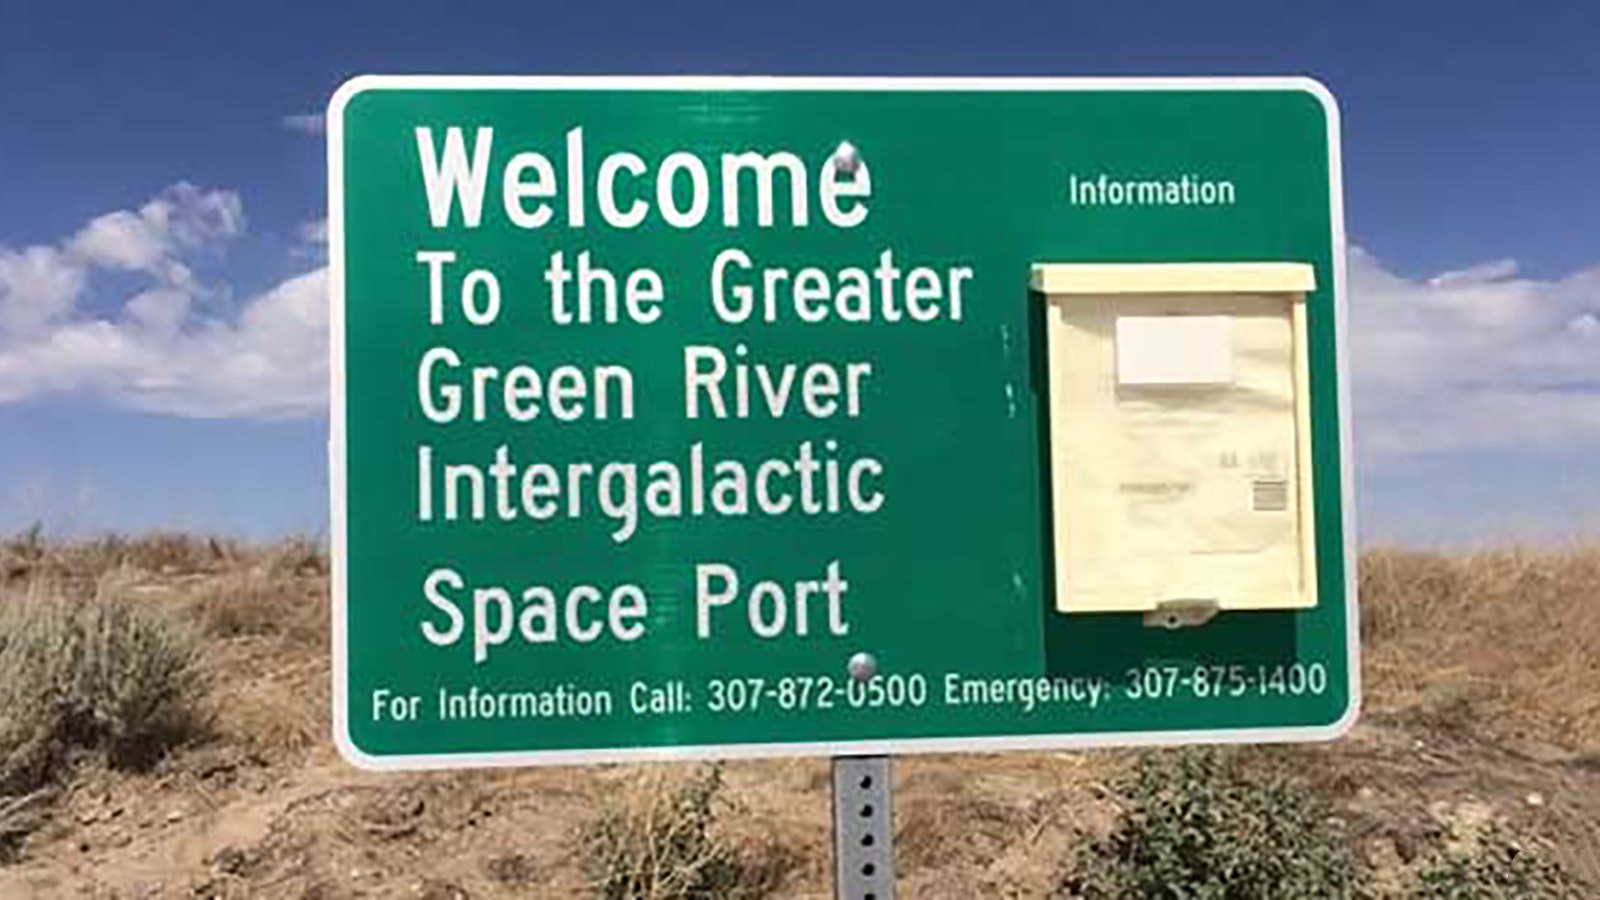 One of the signs greeting people visiting the Greater Green River Intergalactic Spaceport.